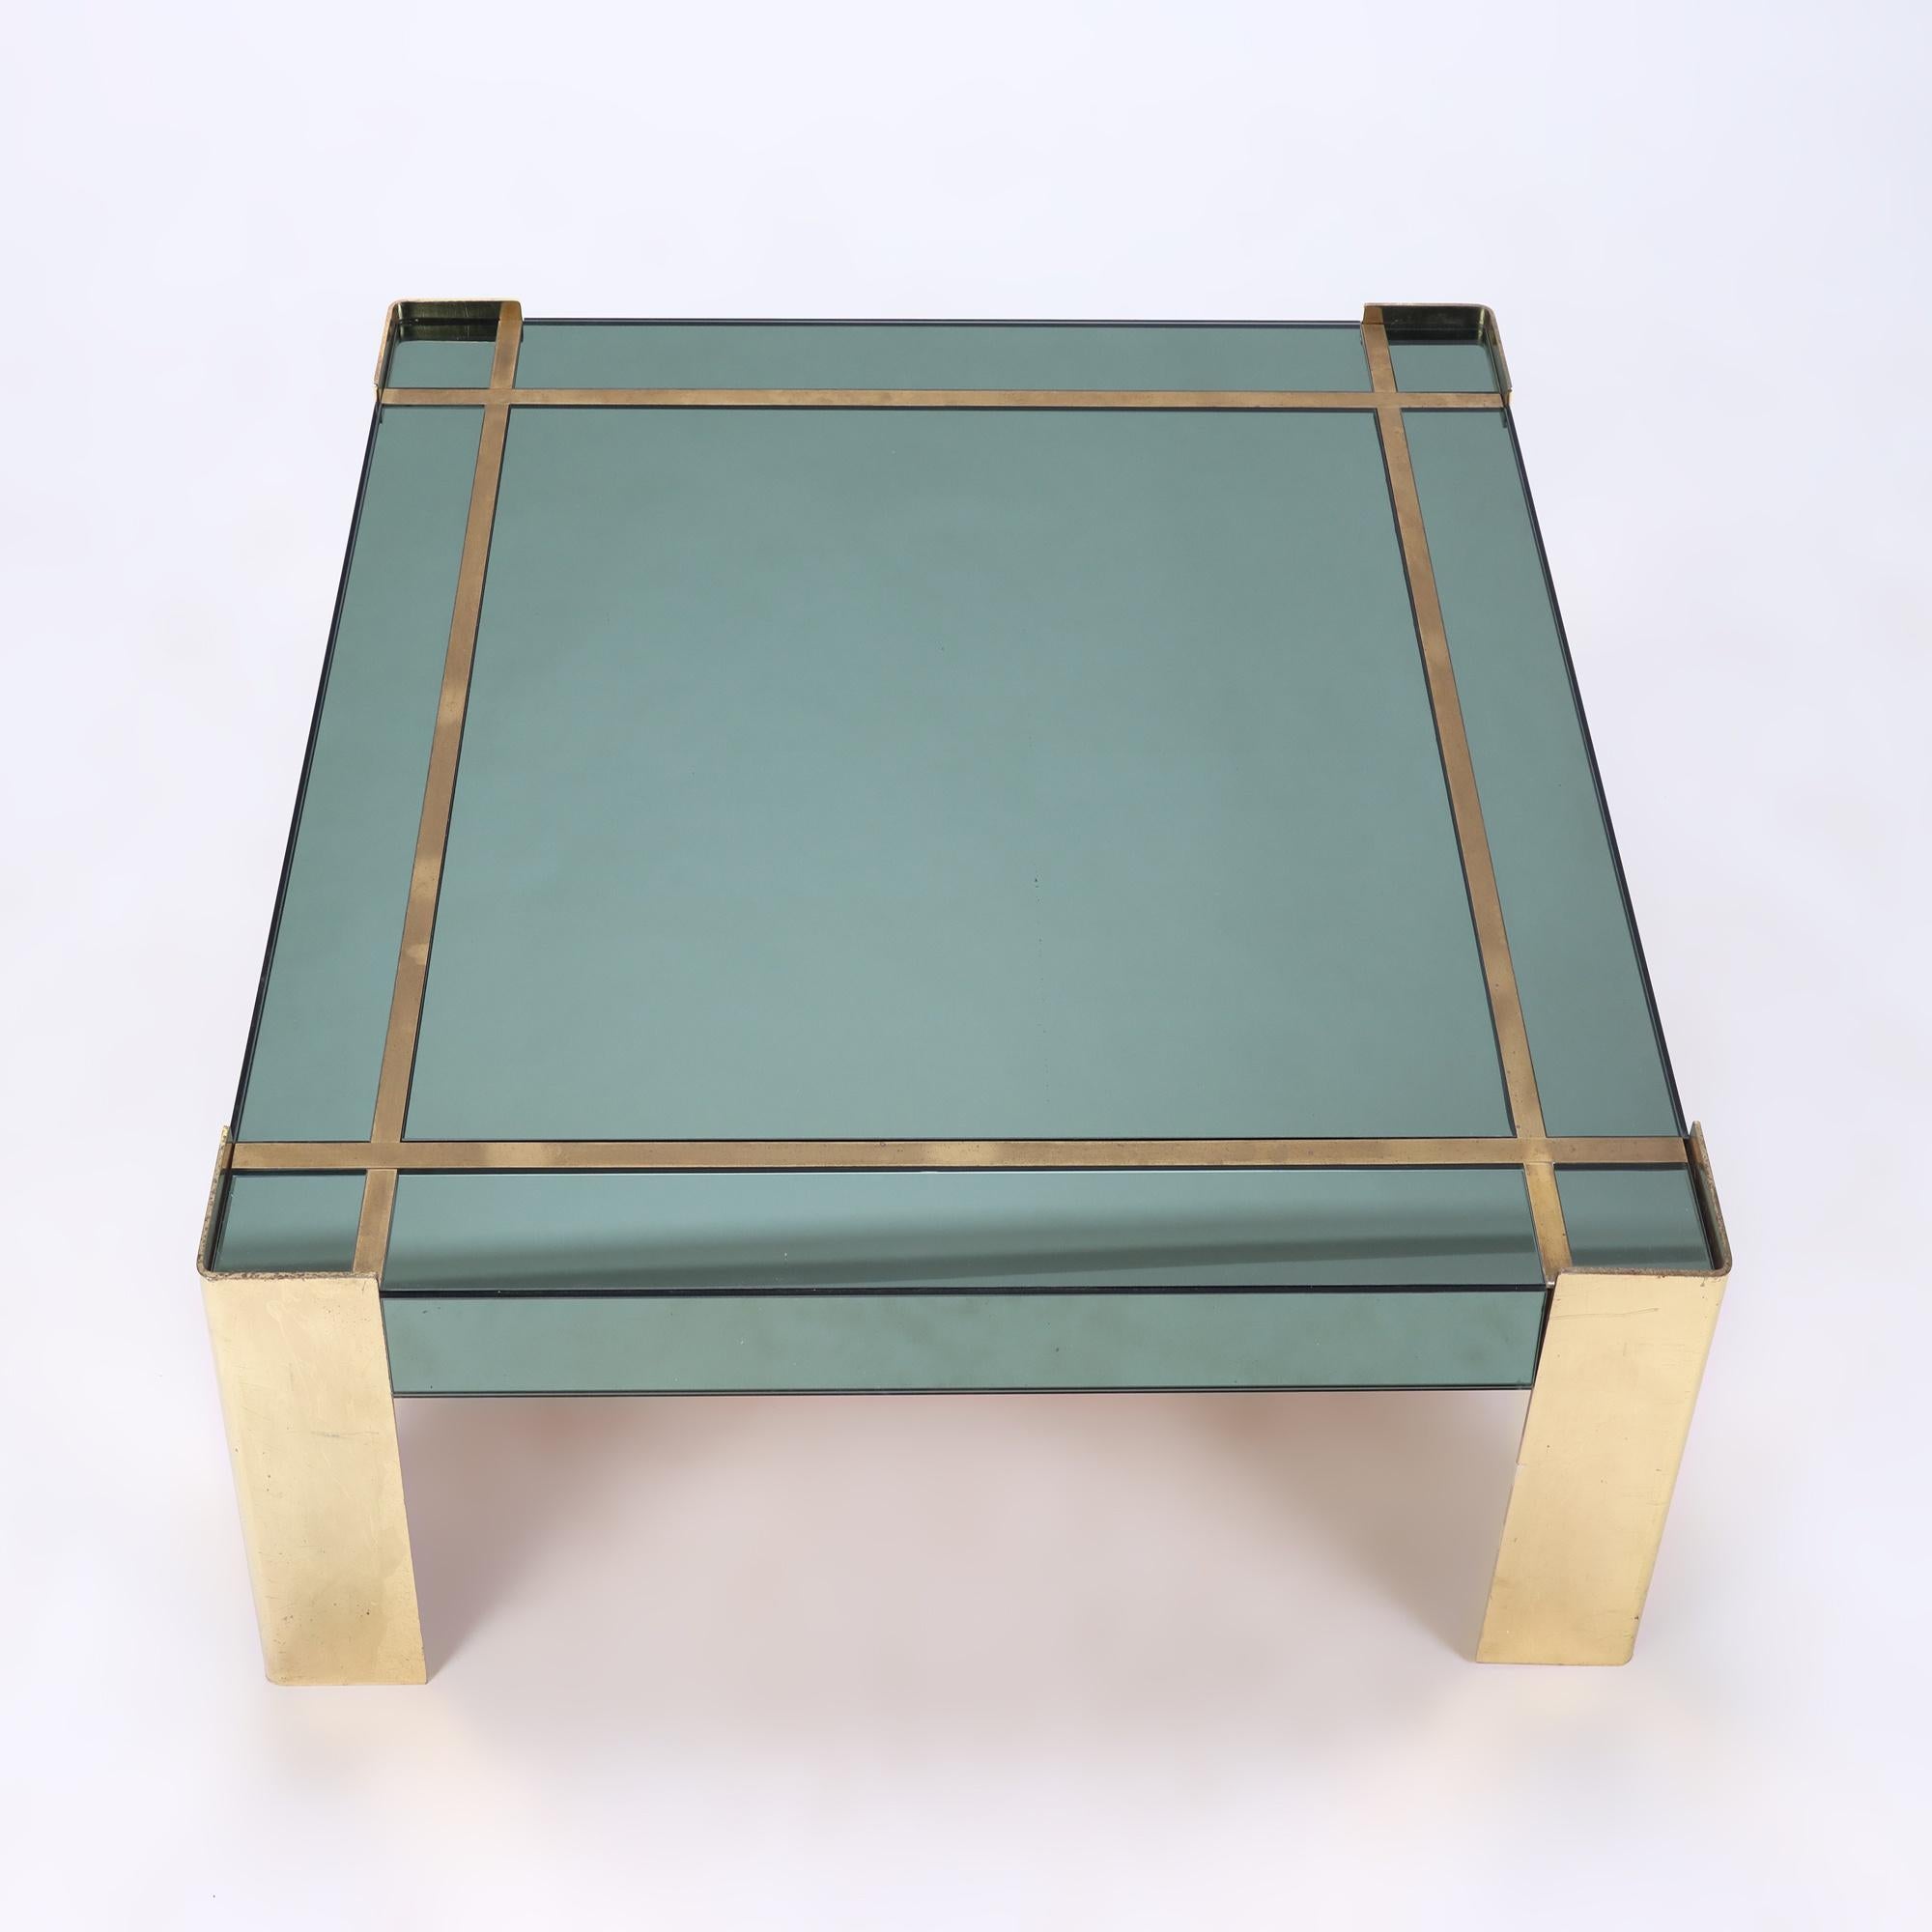 Late 20th Century Mid-Century Modern Glass Top Coffee Table with Brass Legs and Trim, Circa 1970 For Sale